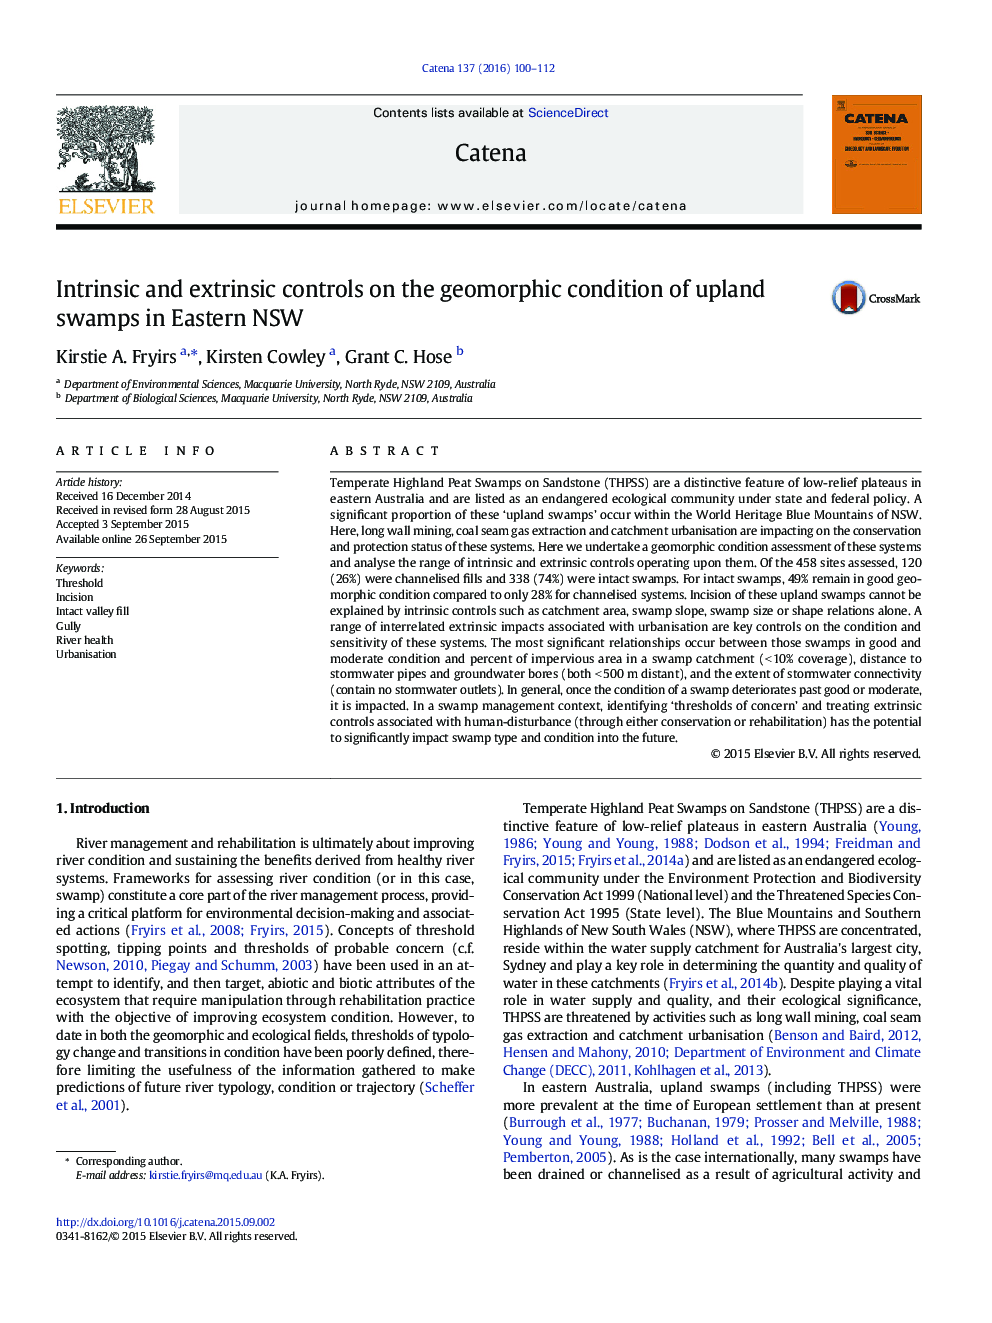 Intrinsic and extrinsic controls on the geomorphic condition of upland swamps in Eastern NSW